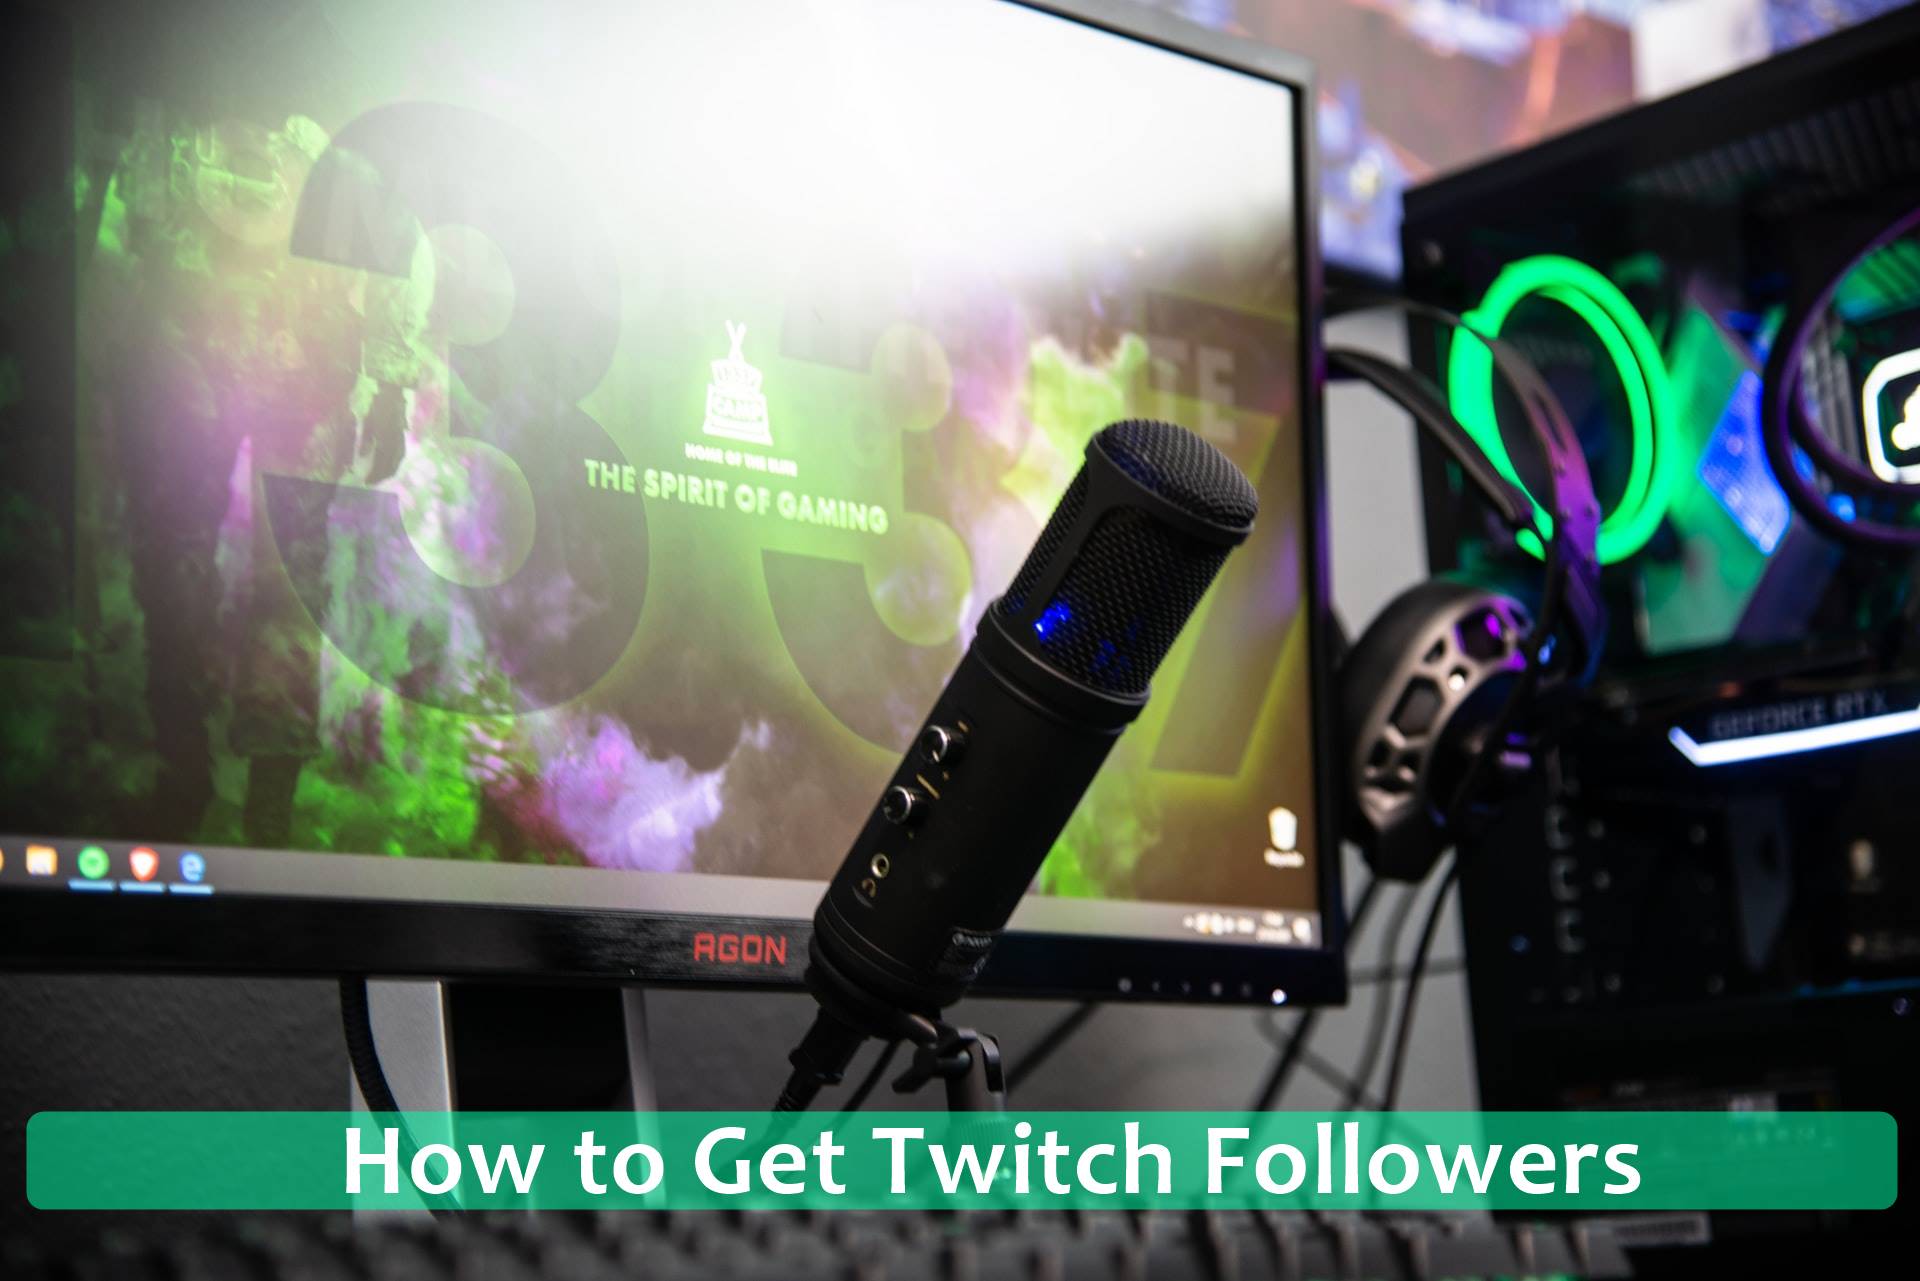 How to Get Twitch Followers